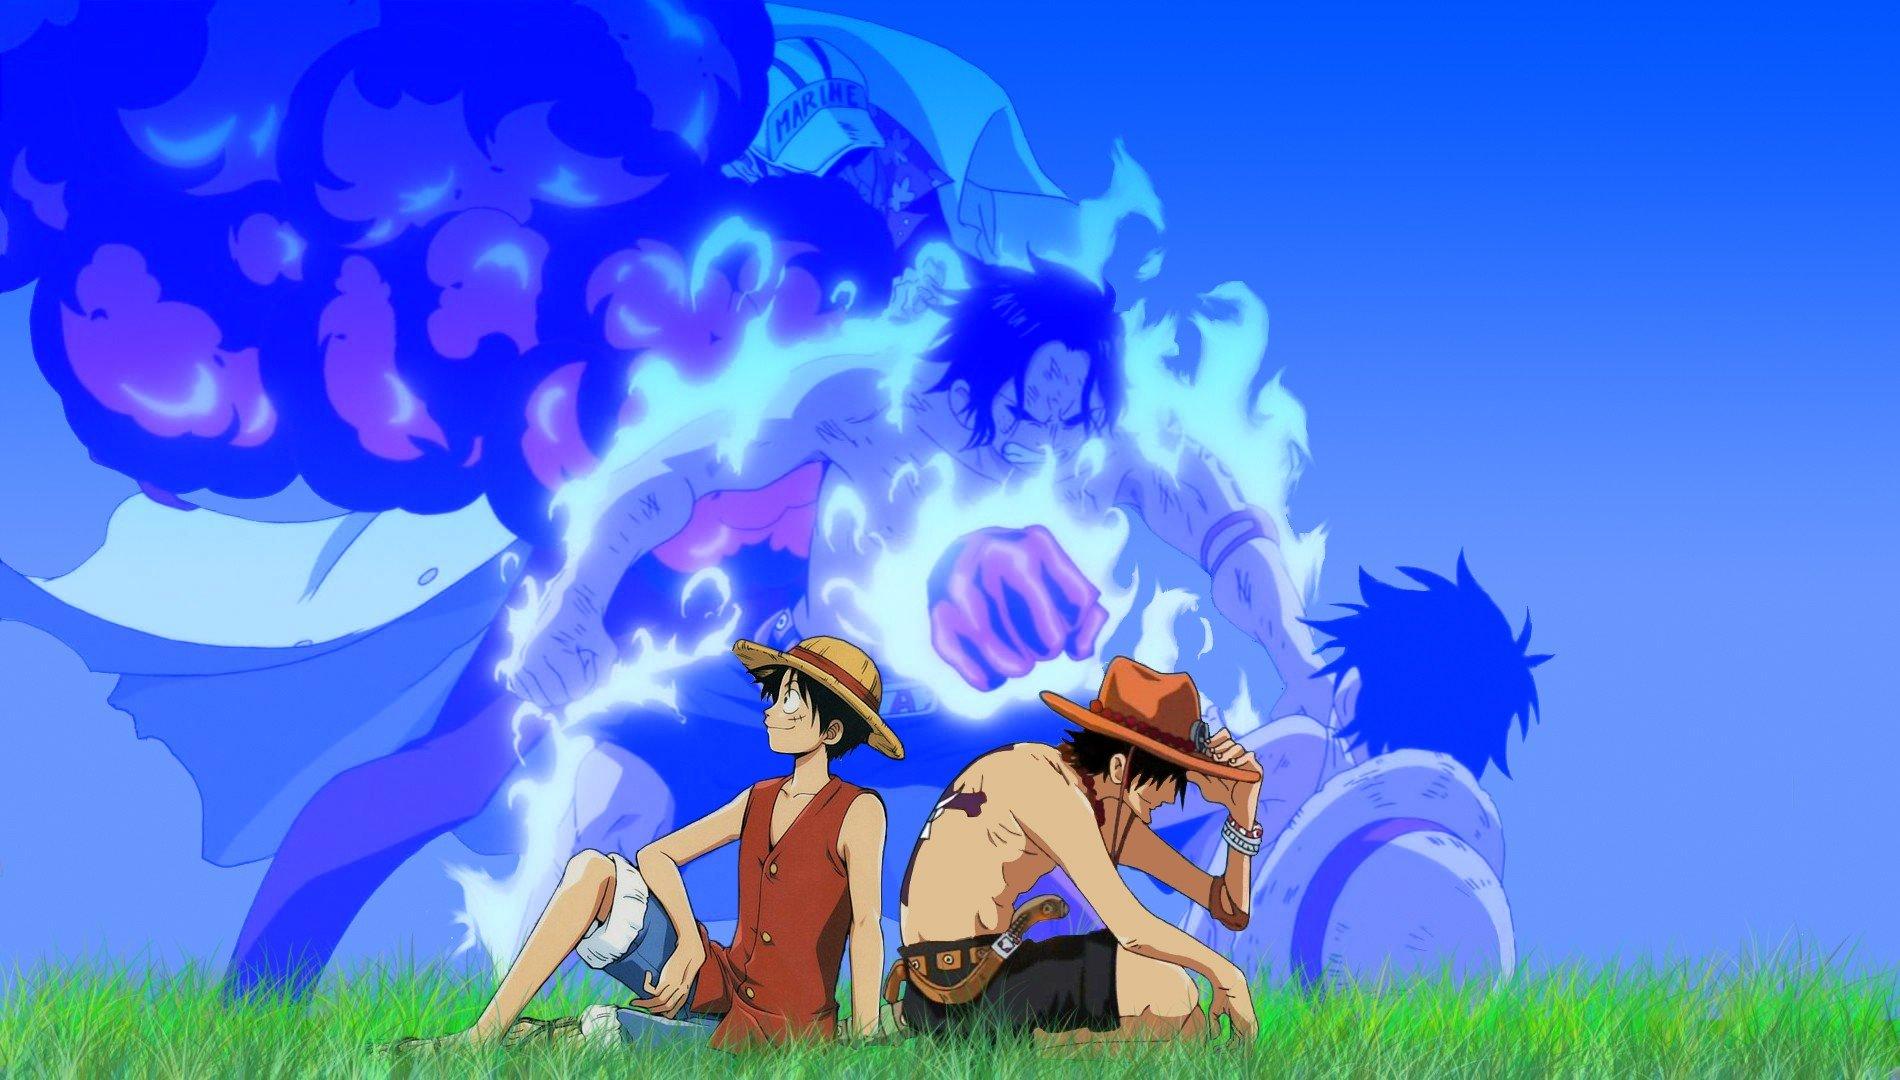 One Piece Blue Wallpapers - Wallpaper - #1 Source for free Awesome ...